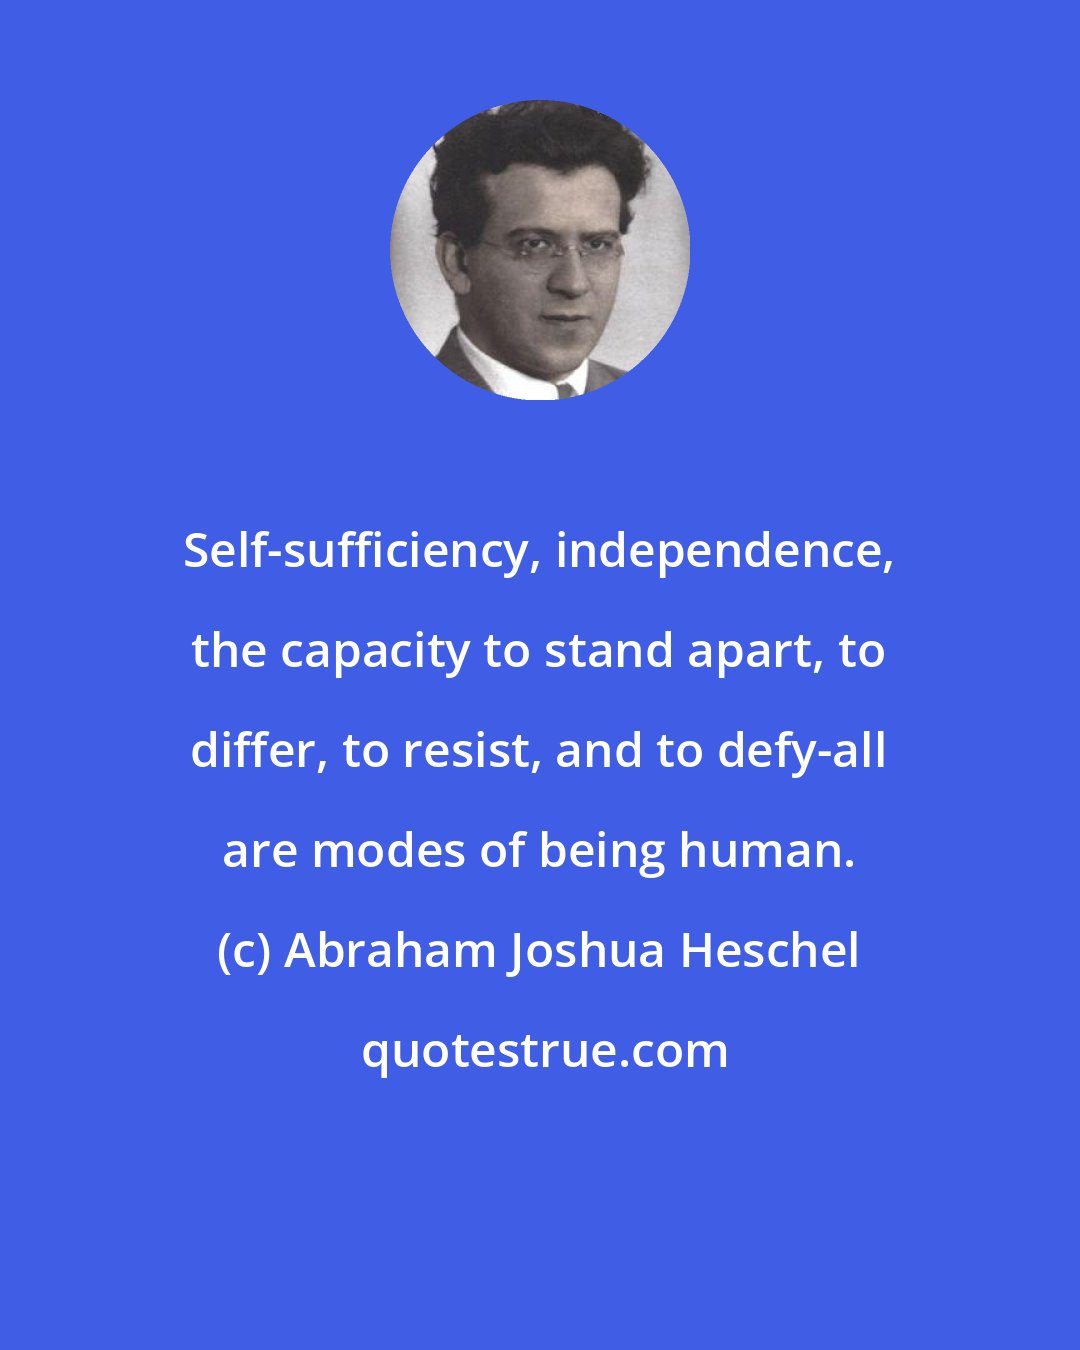 Abraham Joshua Heschel: Self-sufficiency, independence, the capacity to stand apart, to differ, to resist, and to defy-all are modes of being human.